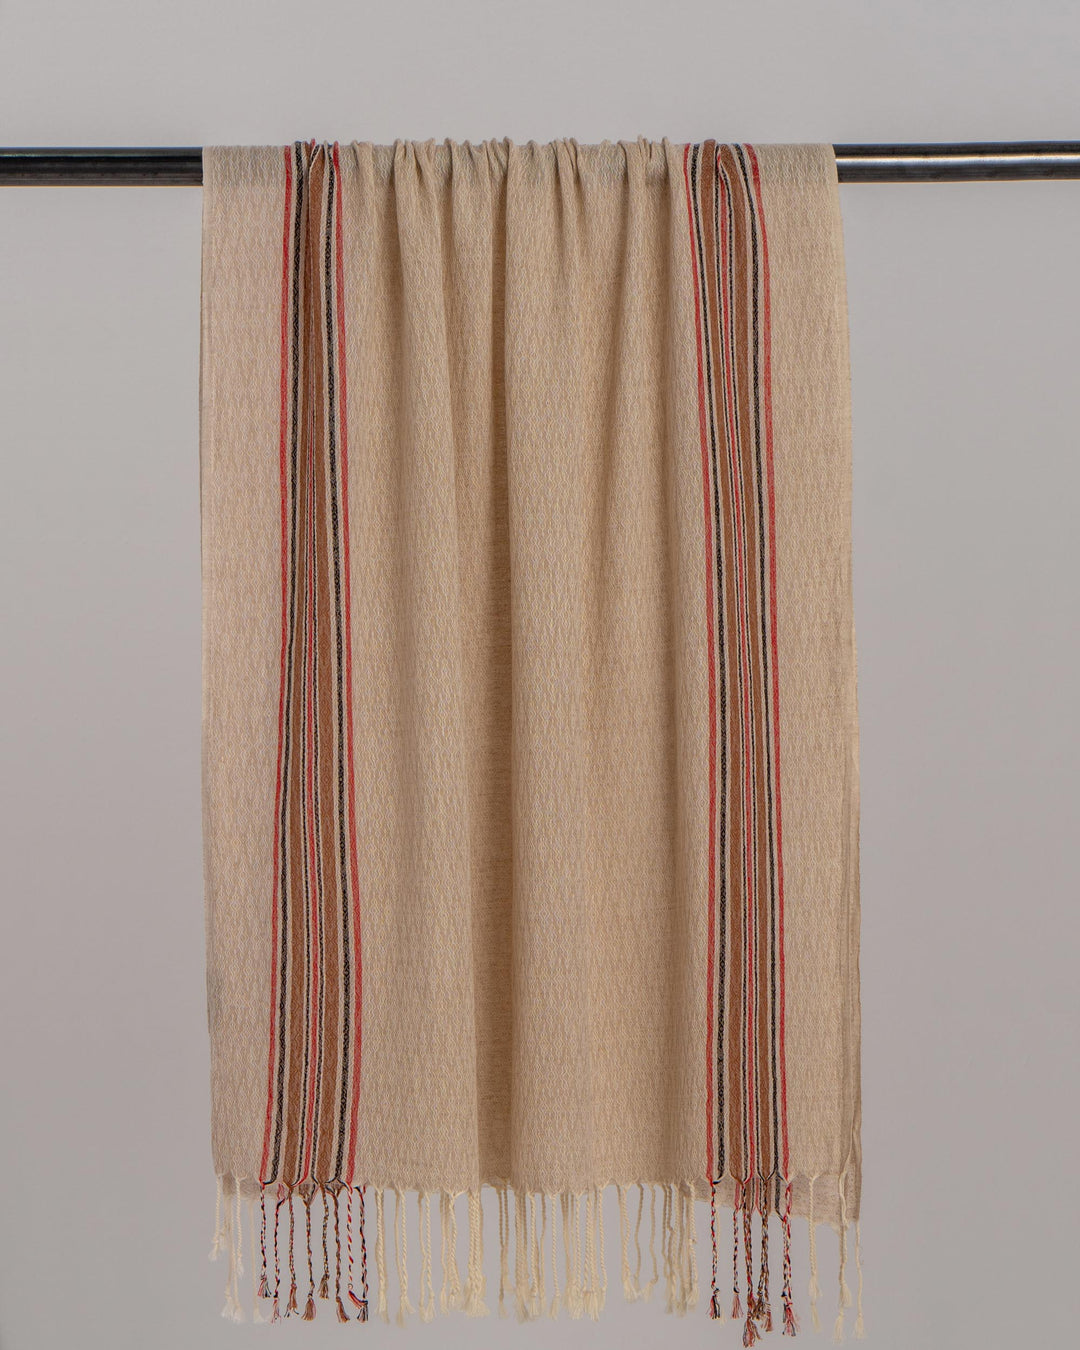 Hand-loomed striped cotton towel